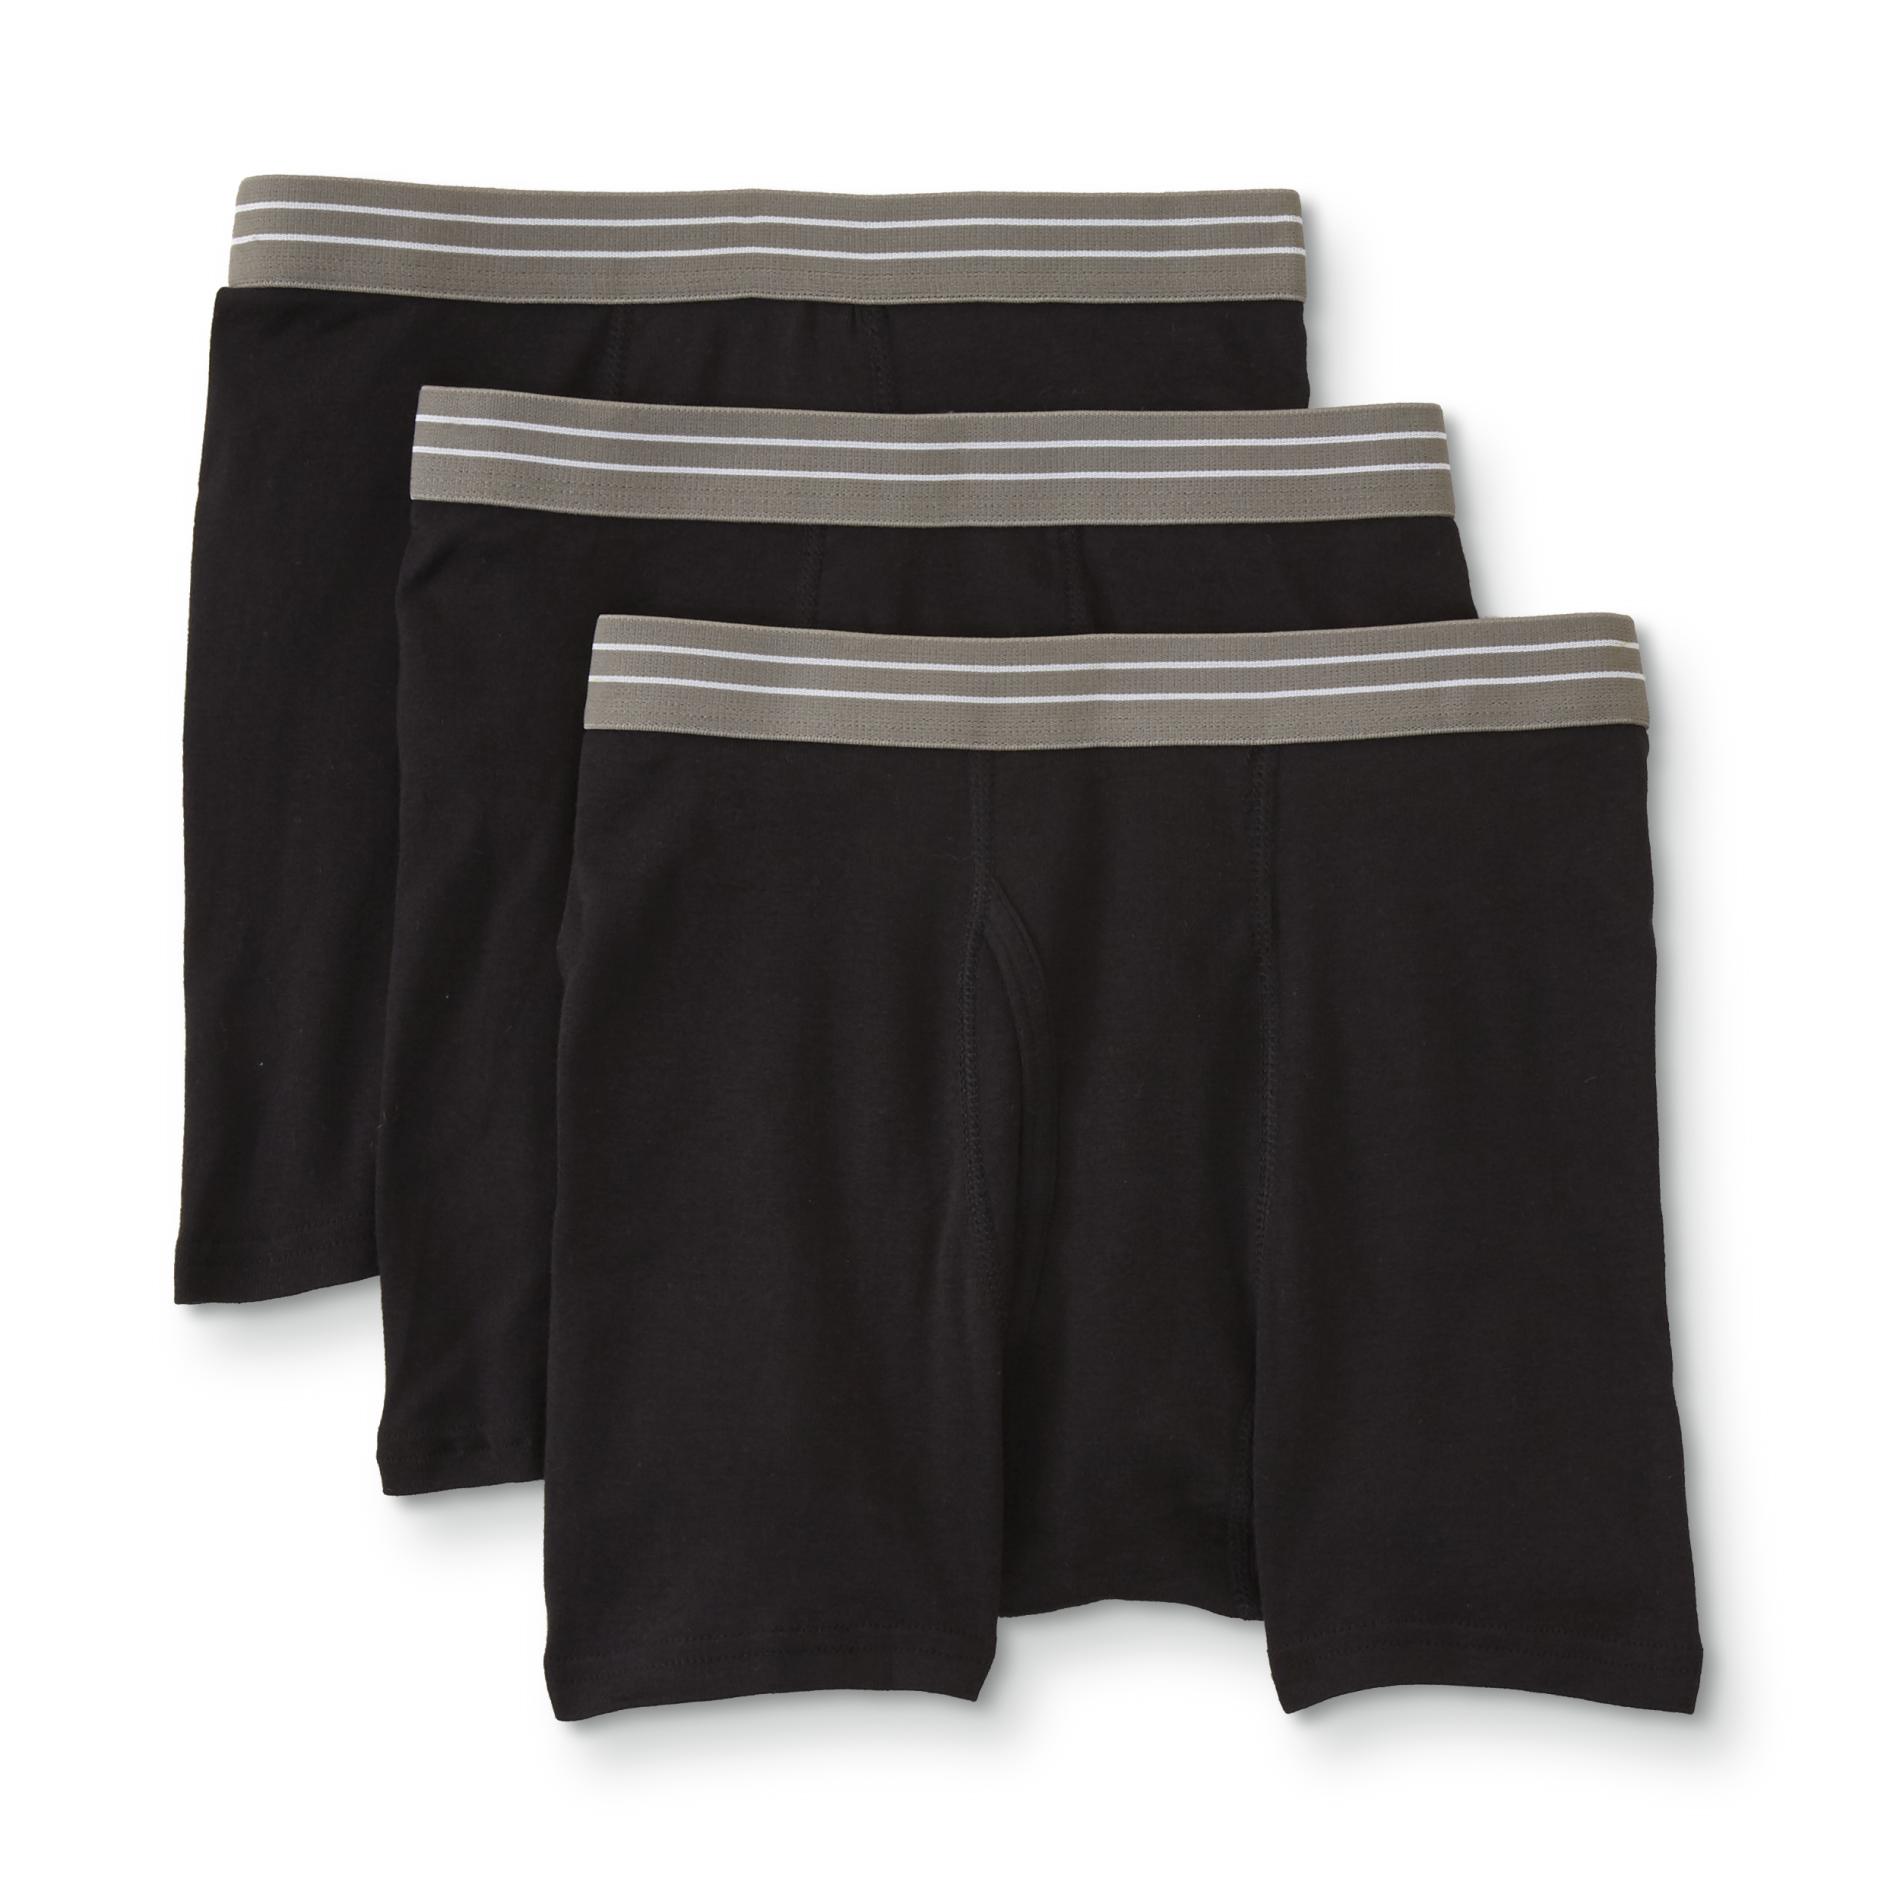 Simply Styled Men's Big & Tall 3-Pack Boxer Briefs